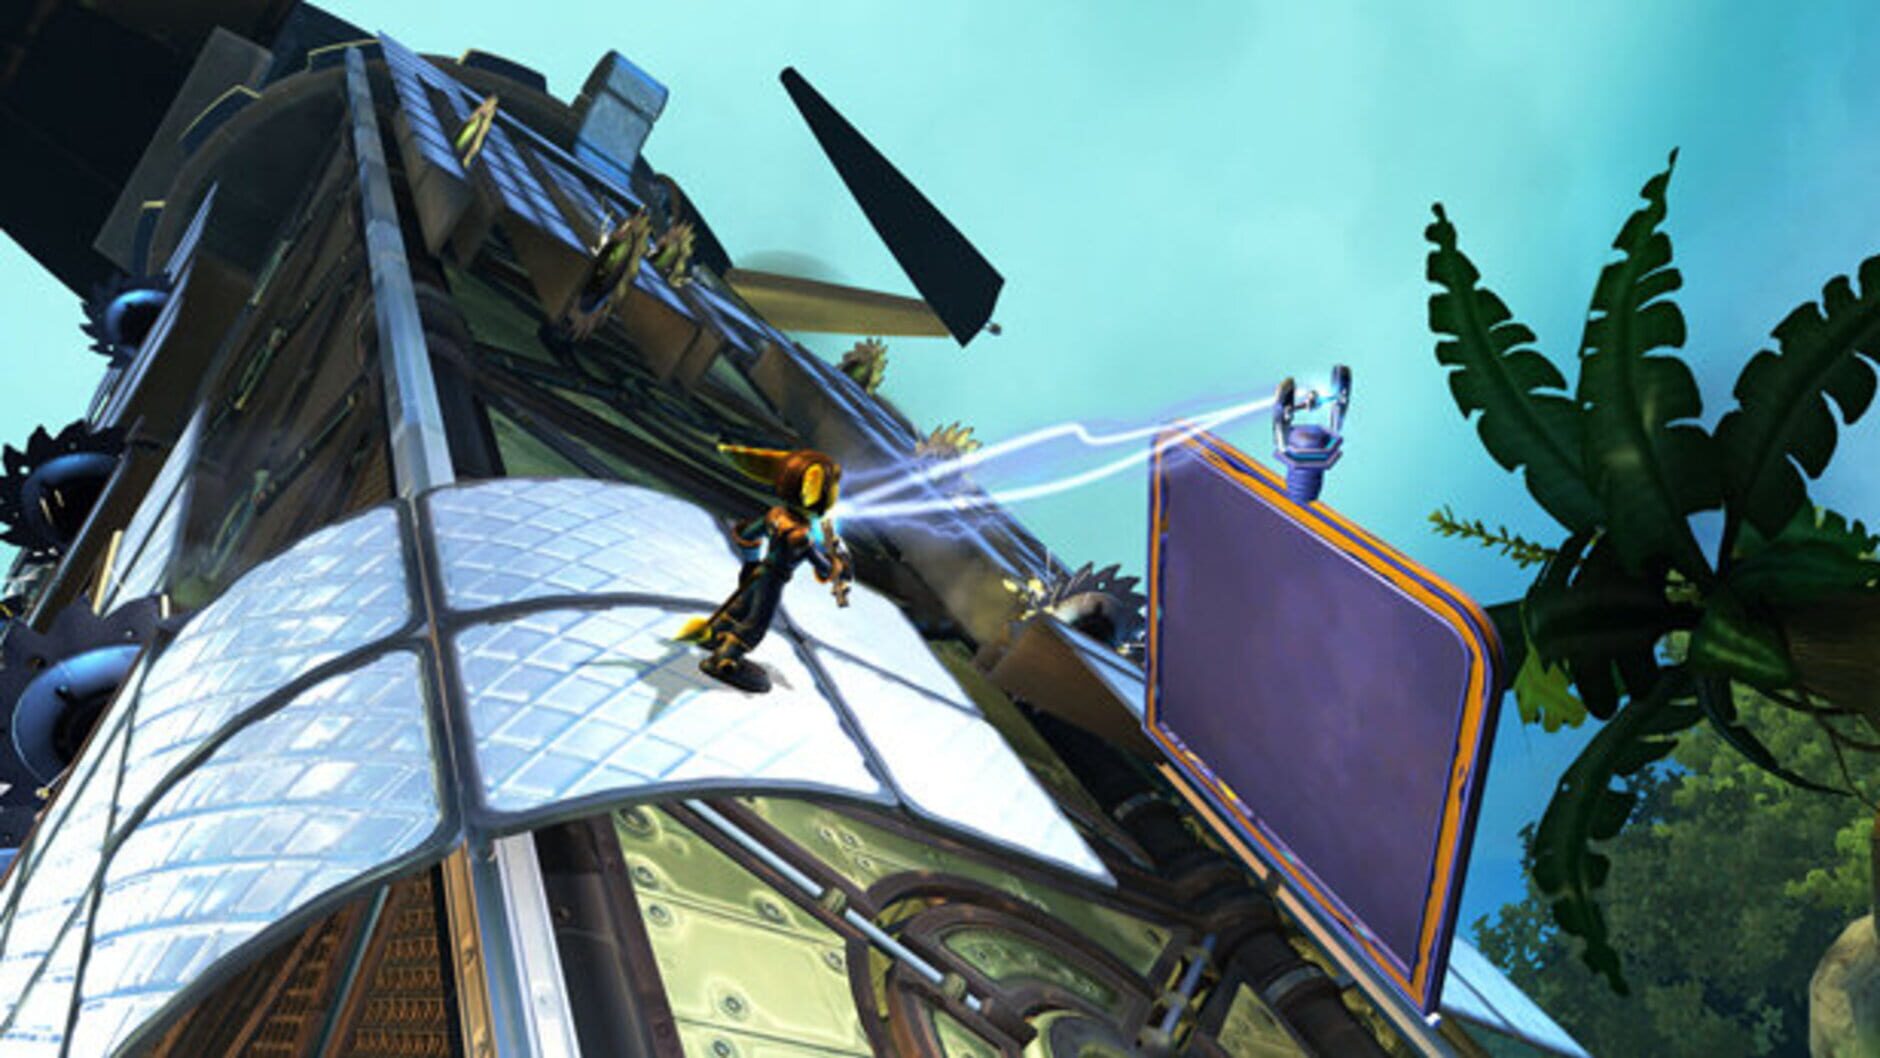 Screenshot for Ratchet & Clank Future: Quest for Booty